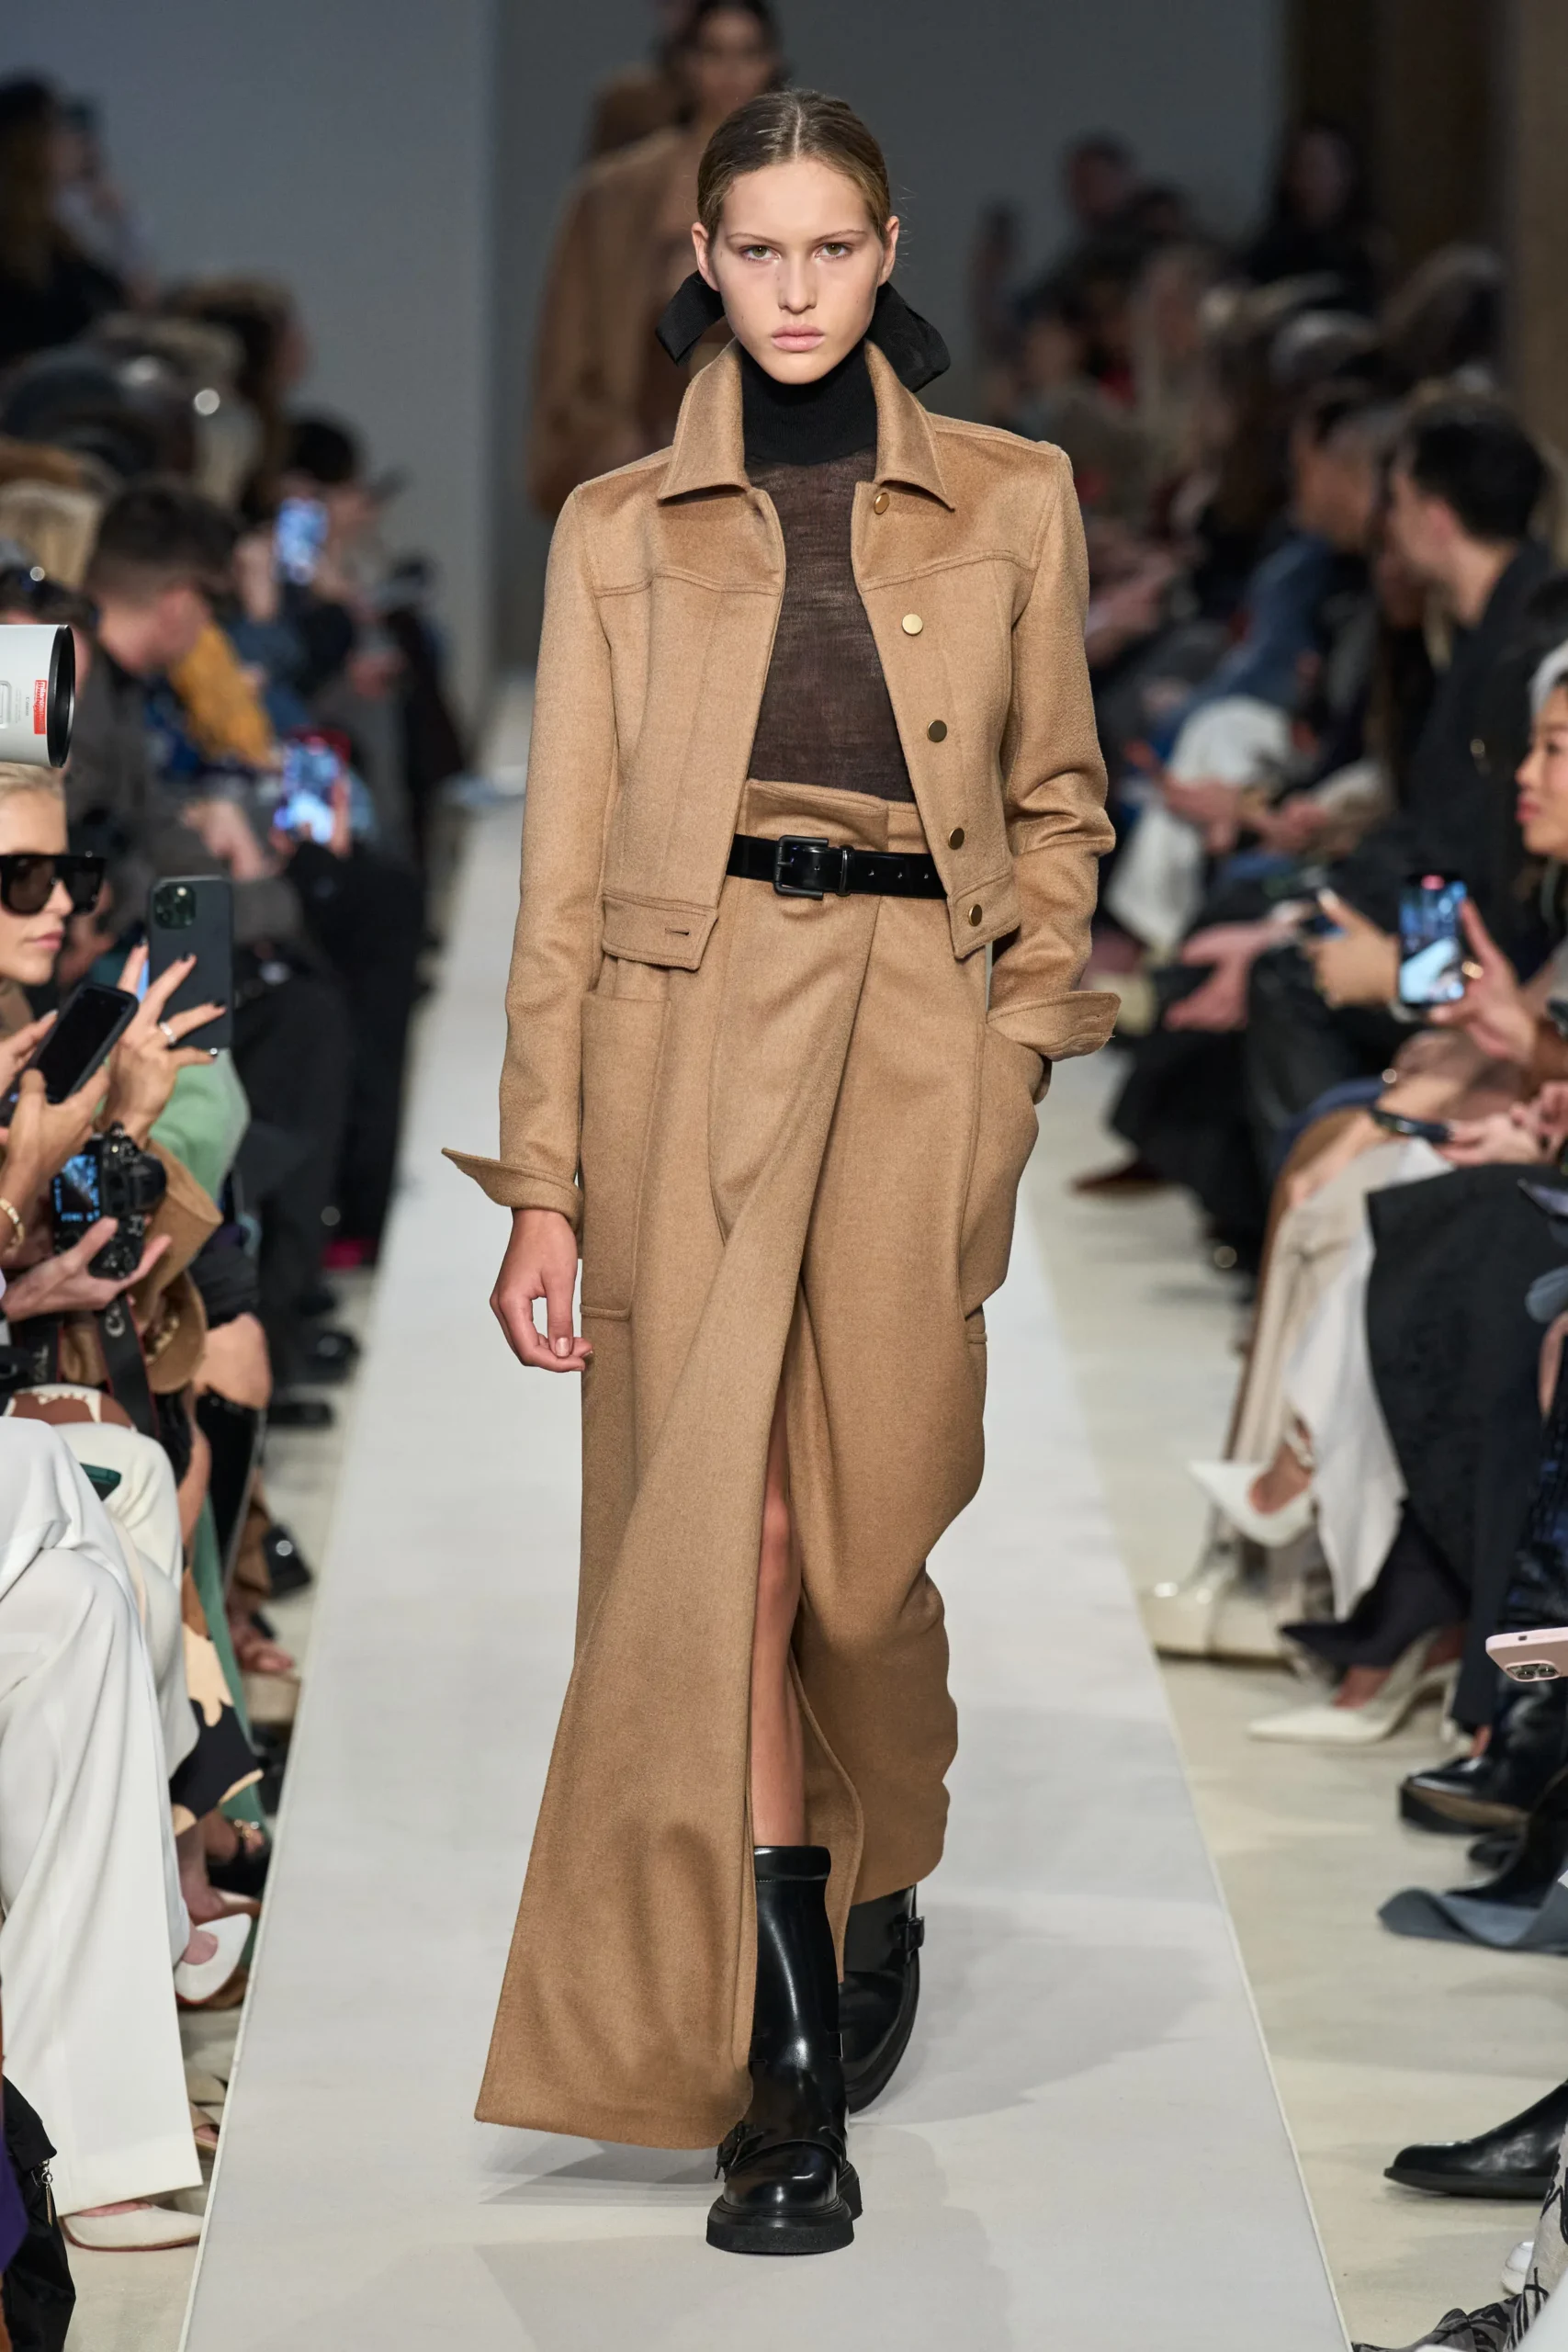 Model walking on a fashion runway, showcasing a fall ready-to-wear outfit by Max Mara. The ensemble features a tailored camel-coloured wool coat with large lapels and a matching wide-legged trouser, cinched at the waist with a black leather belt. Underneath, the model wears a dark turtleneck. She completes her look with black leather ankle boots. The audience, with their cameras out, lines the catwalk, capturing the moment.